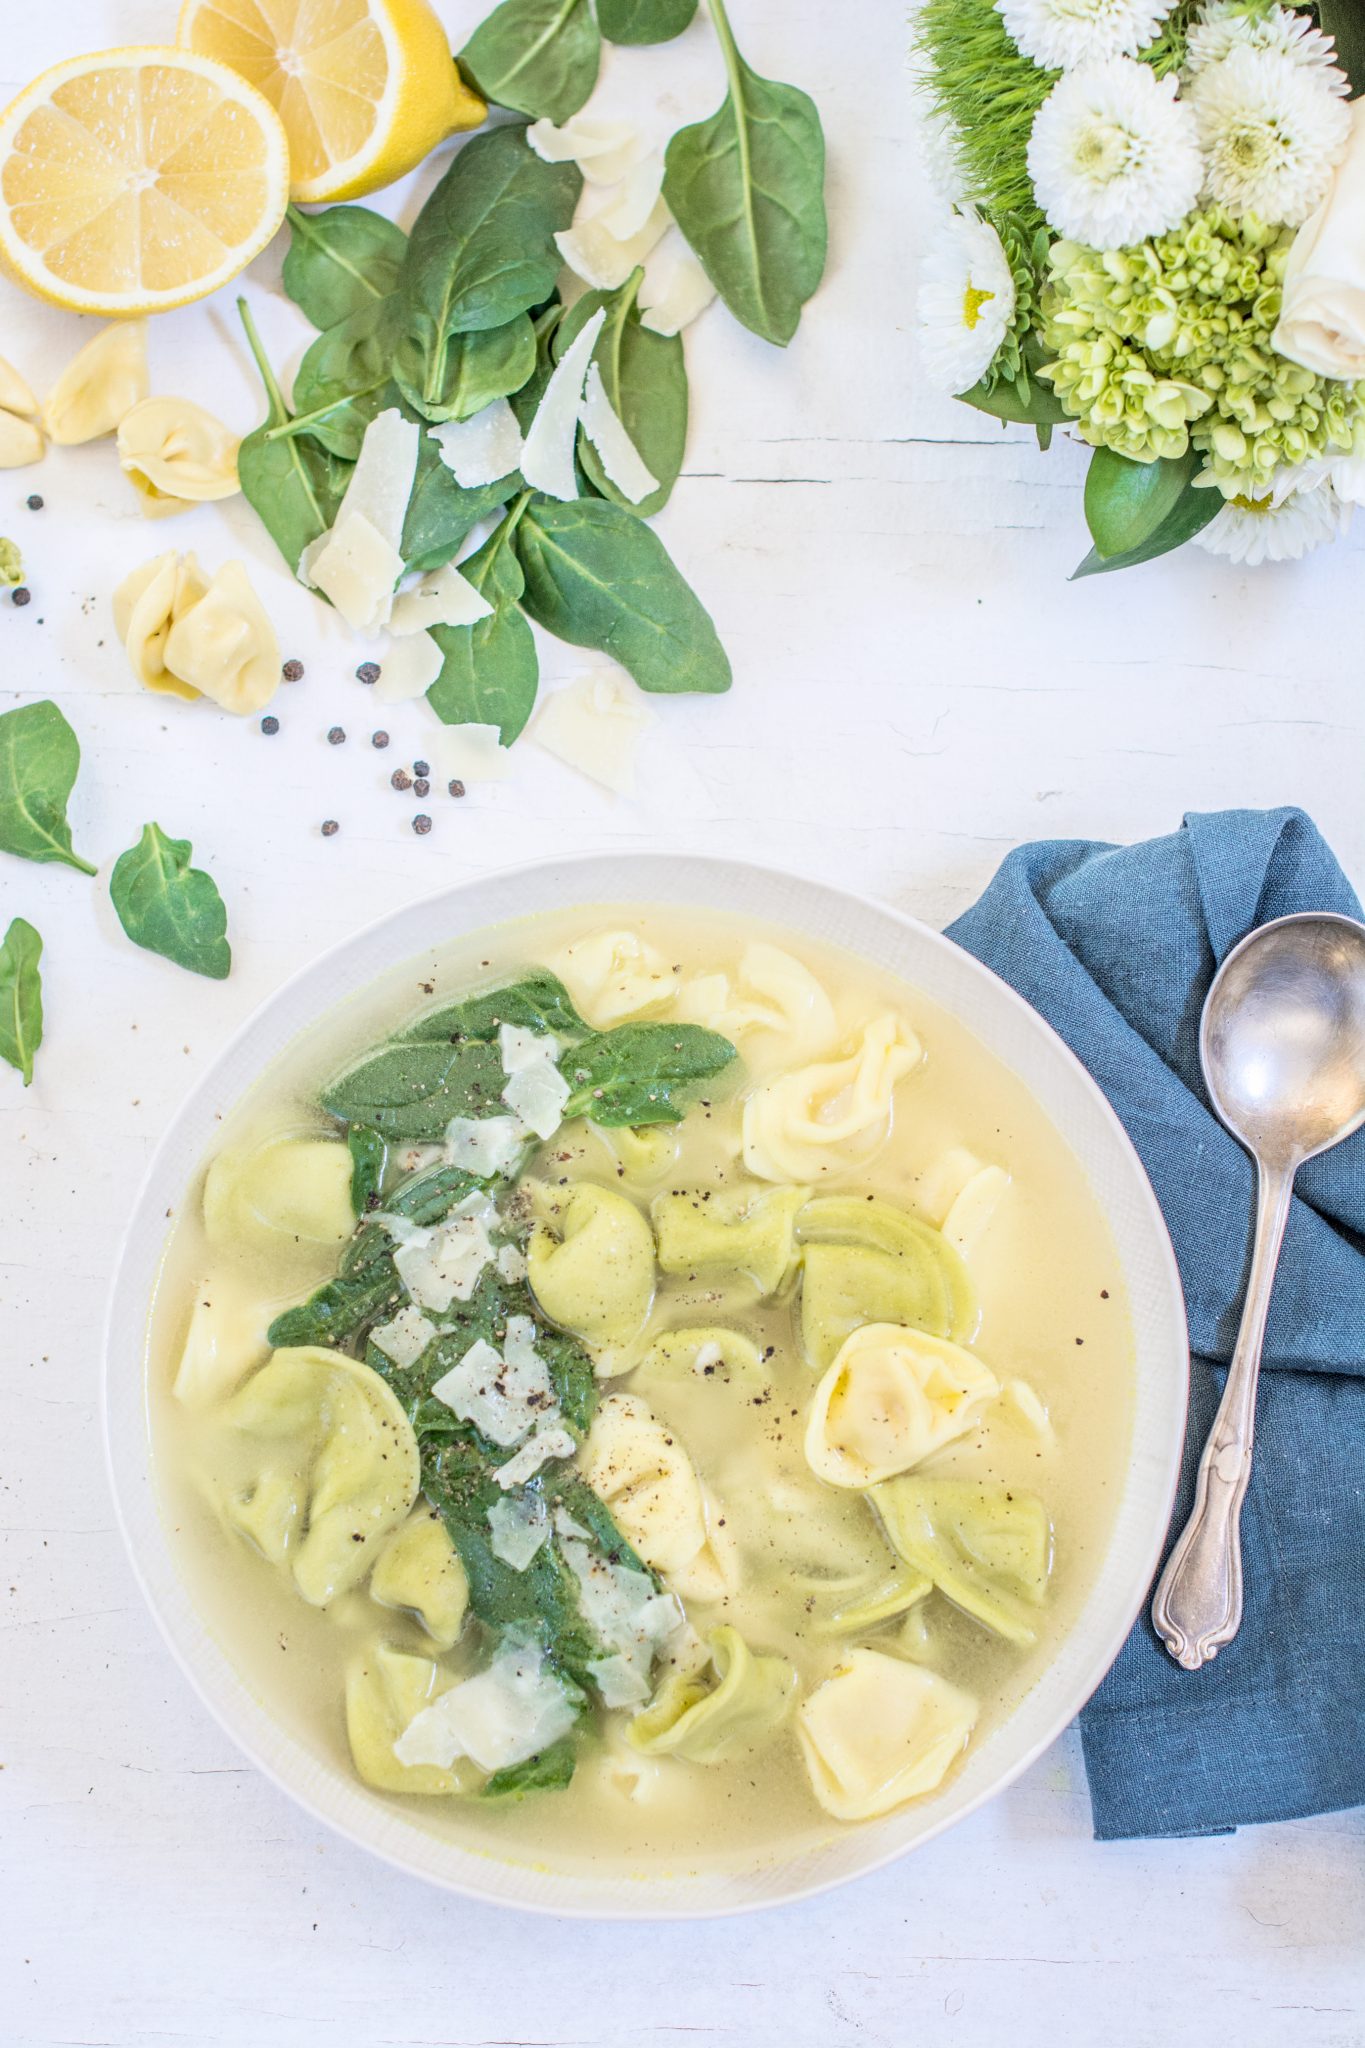 Tortellini Soup with spinach and a hint of lemon. Get the recipe at Little Figgy Food.